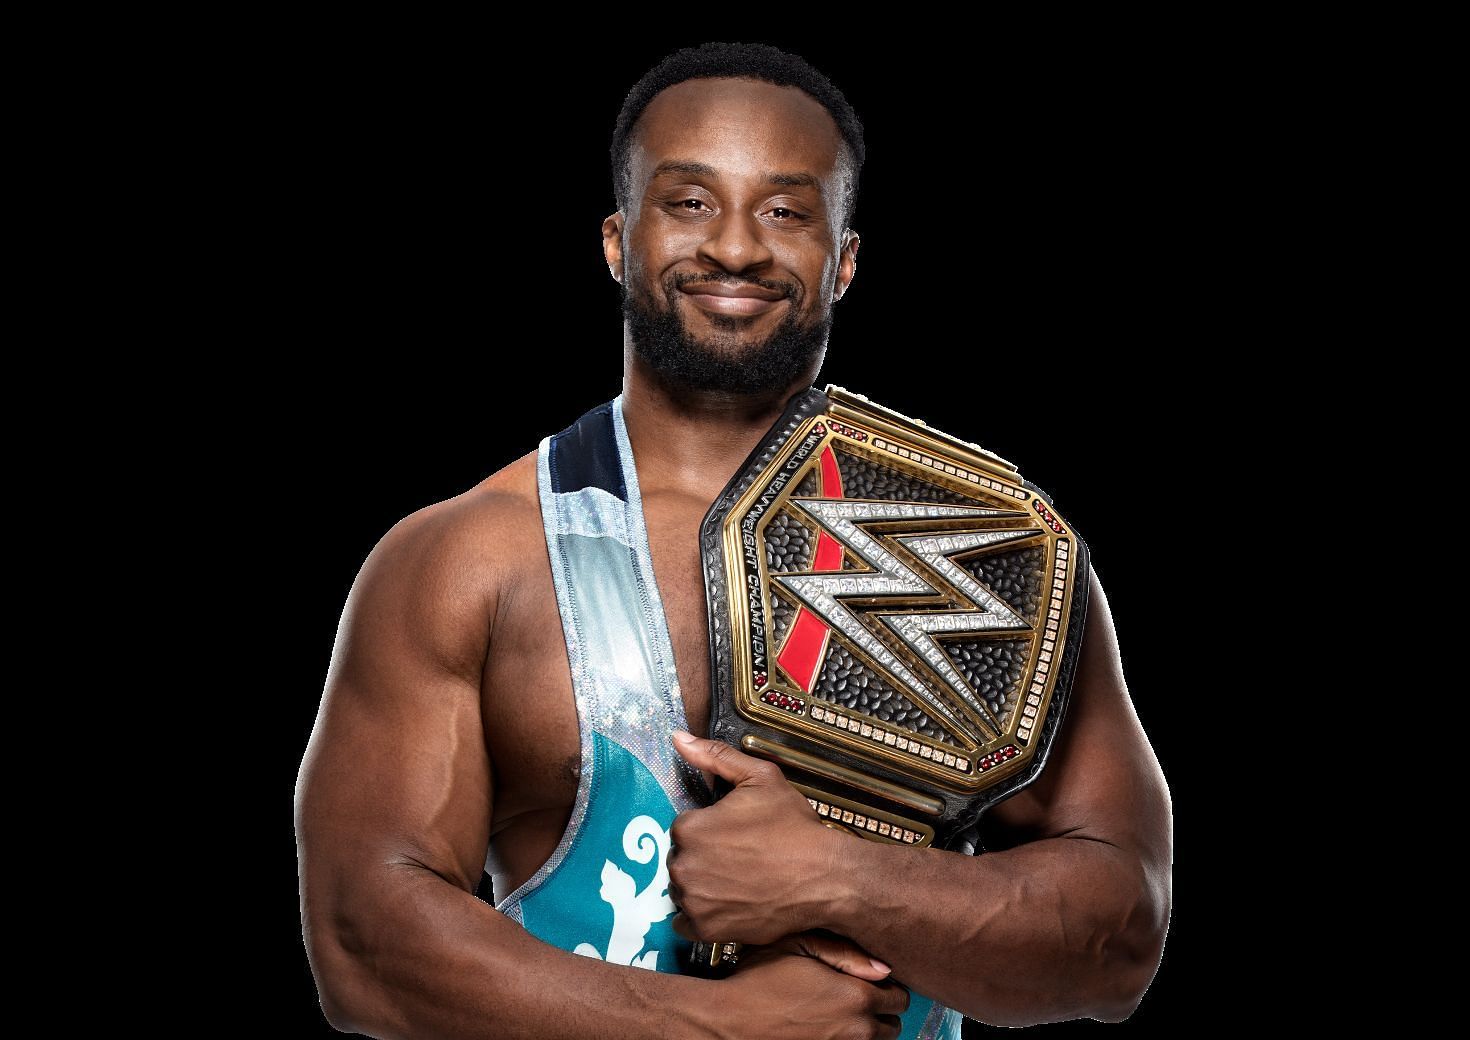 Big E is the current WWE Champion